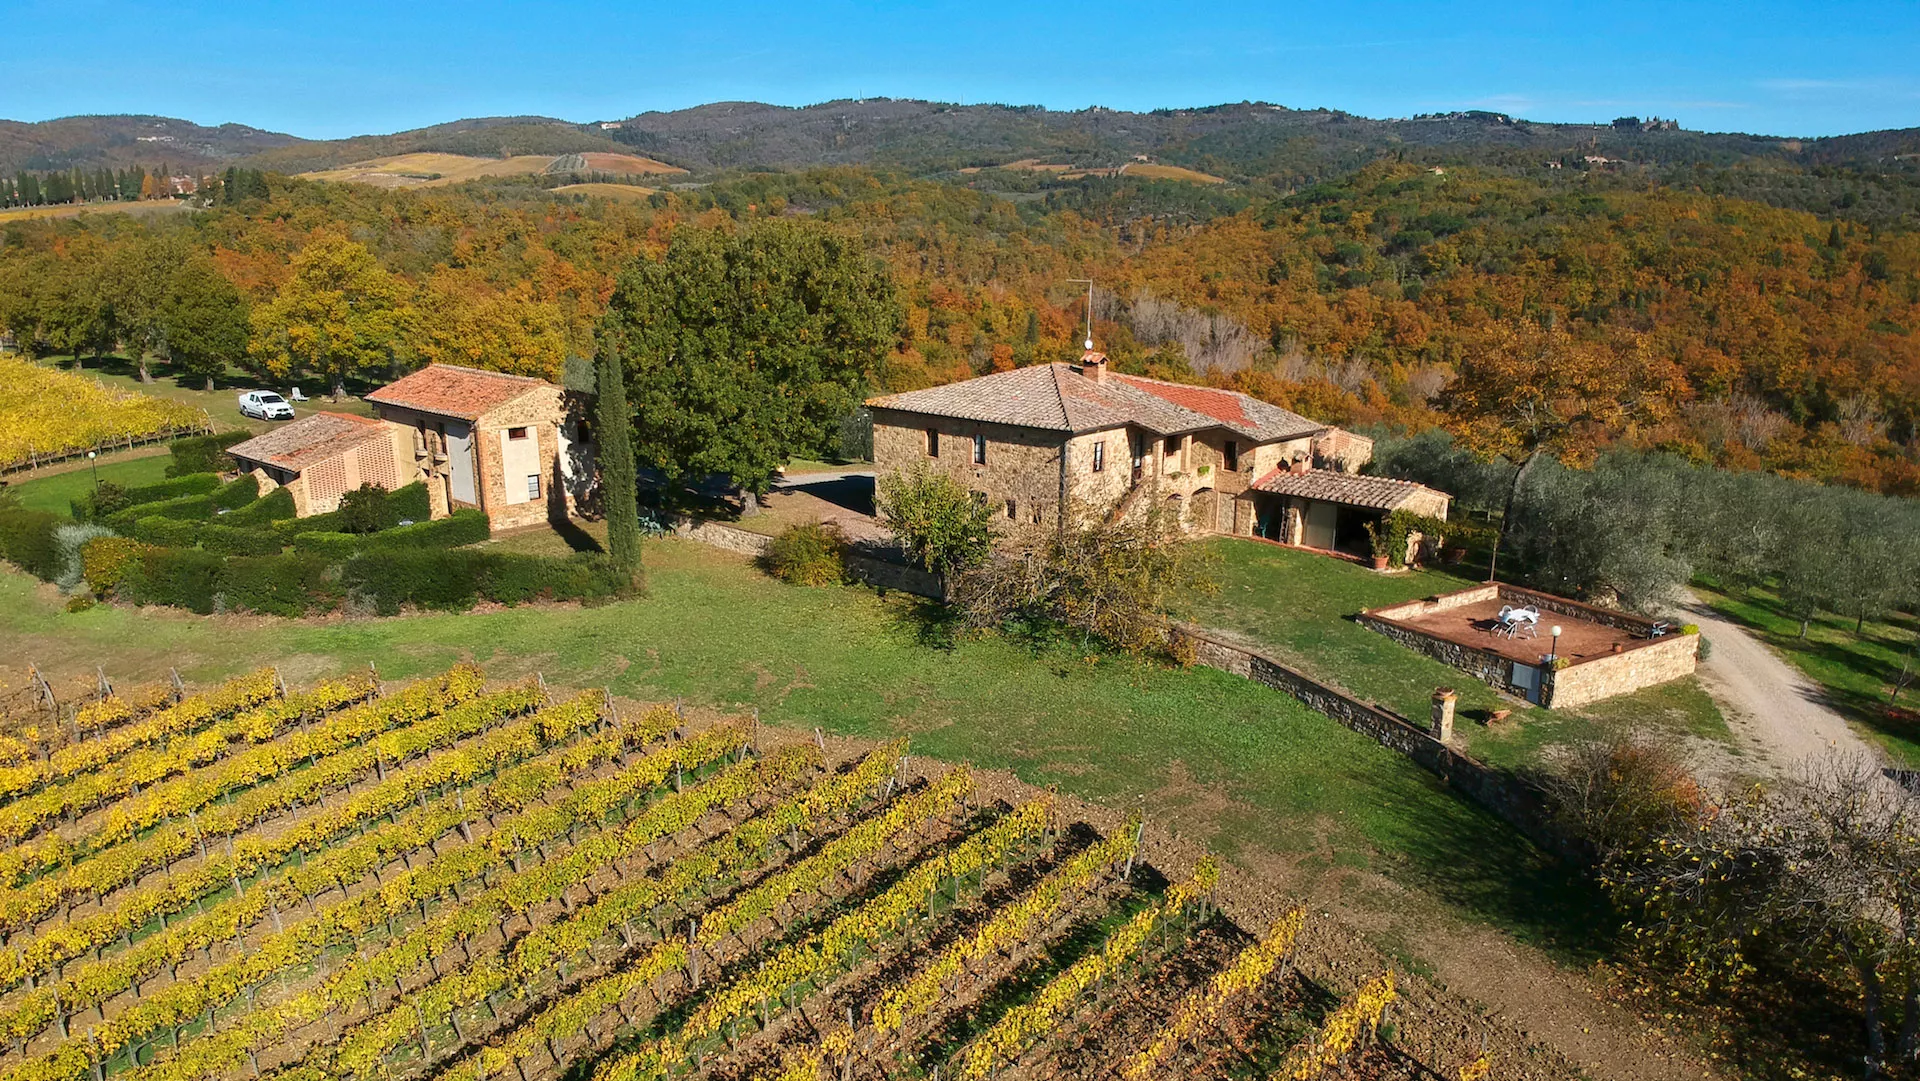 Agriturismo Fattoria Lucciano in Italy, Europe | Wineries - Rated 0.8